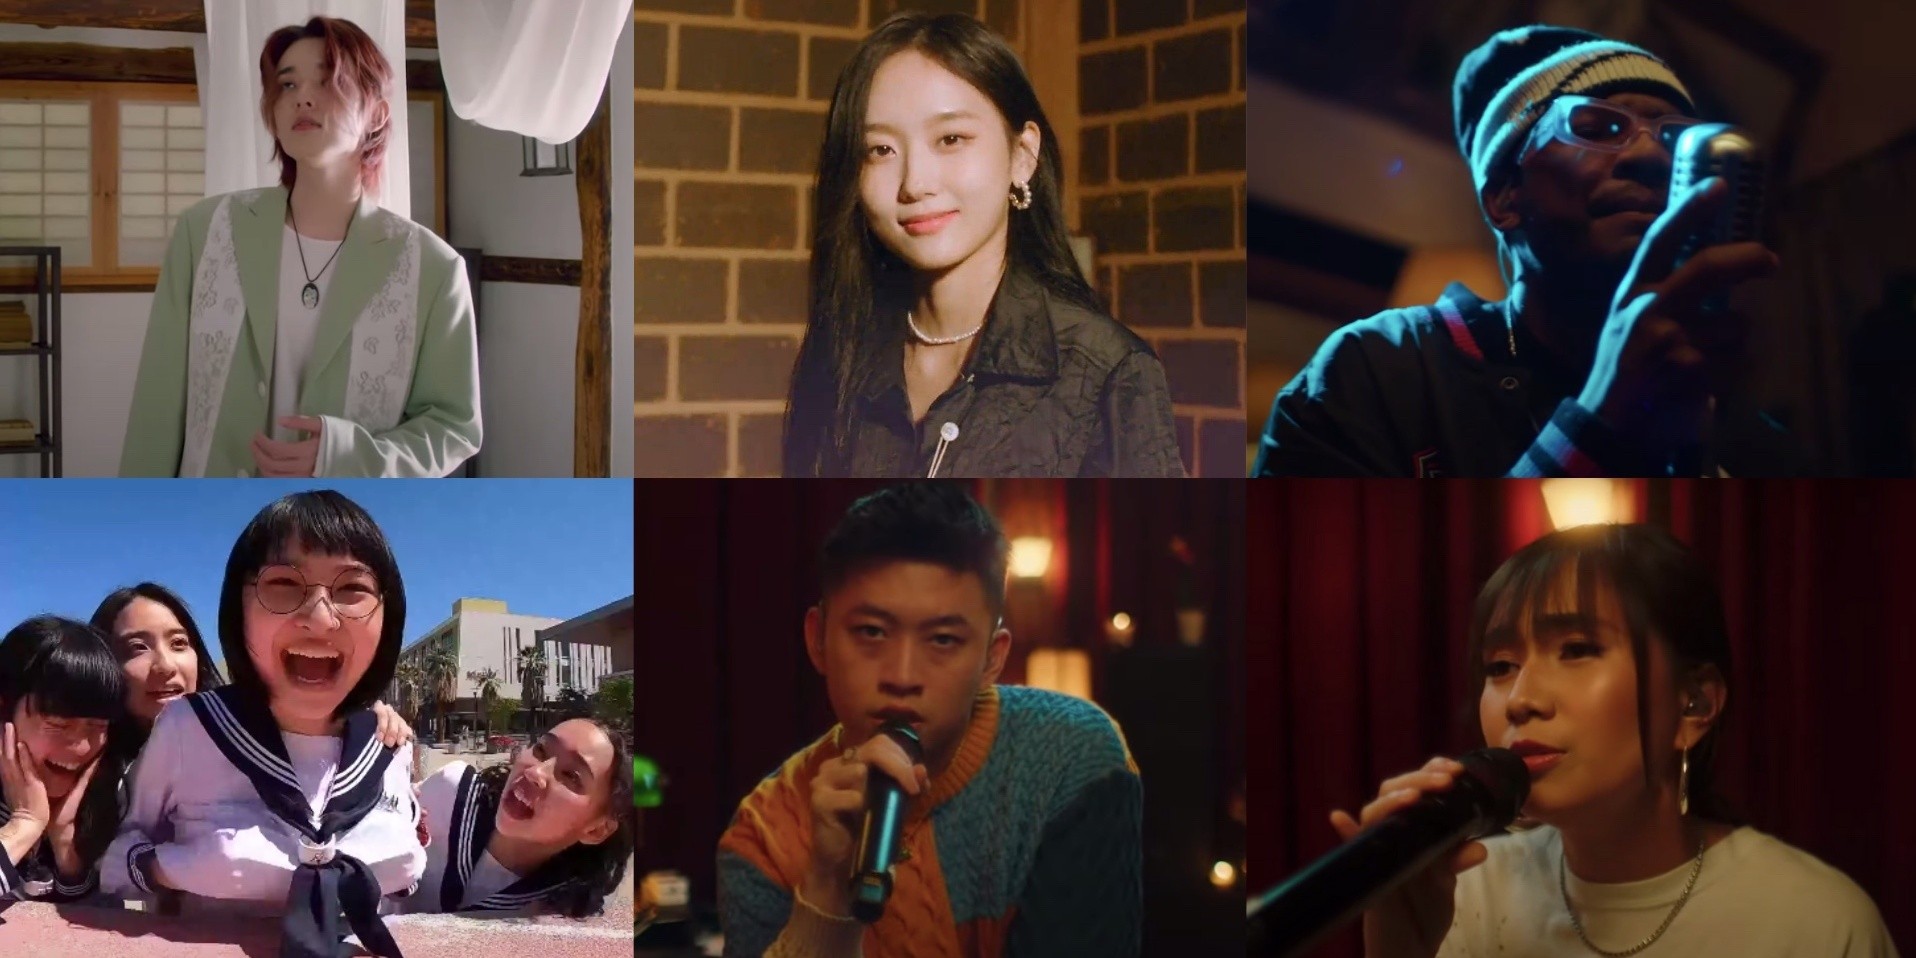 9 highlights from 88rising's 'Asia Rising Together' concert — featuring DAY6's Jae, Seori, Guapdad 4000, NIKI, Rich Brian, and more